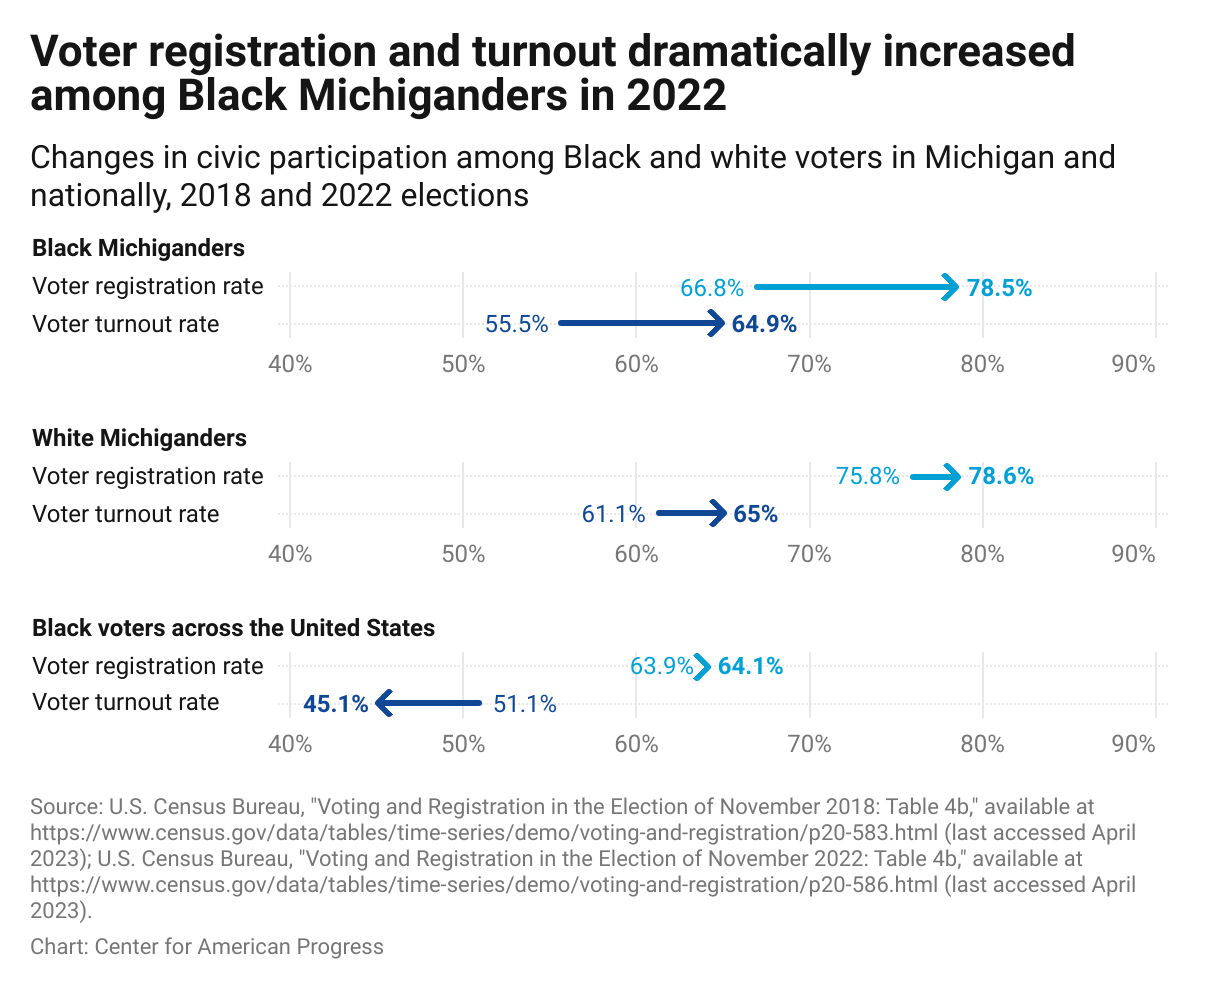 Chart showing the voter registration rates and voter turnout rates for Black Michiganders, white Michiganders, and Black voters across the United States in 2018 and 2022.